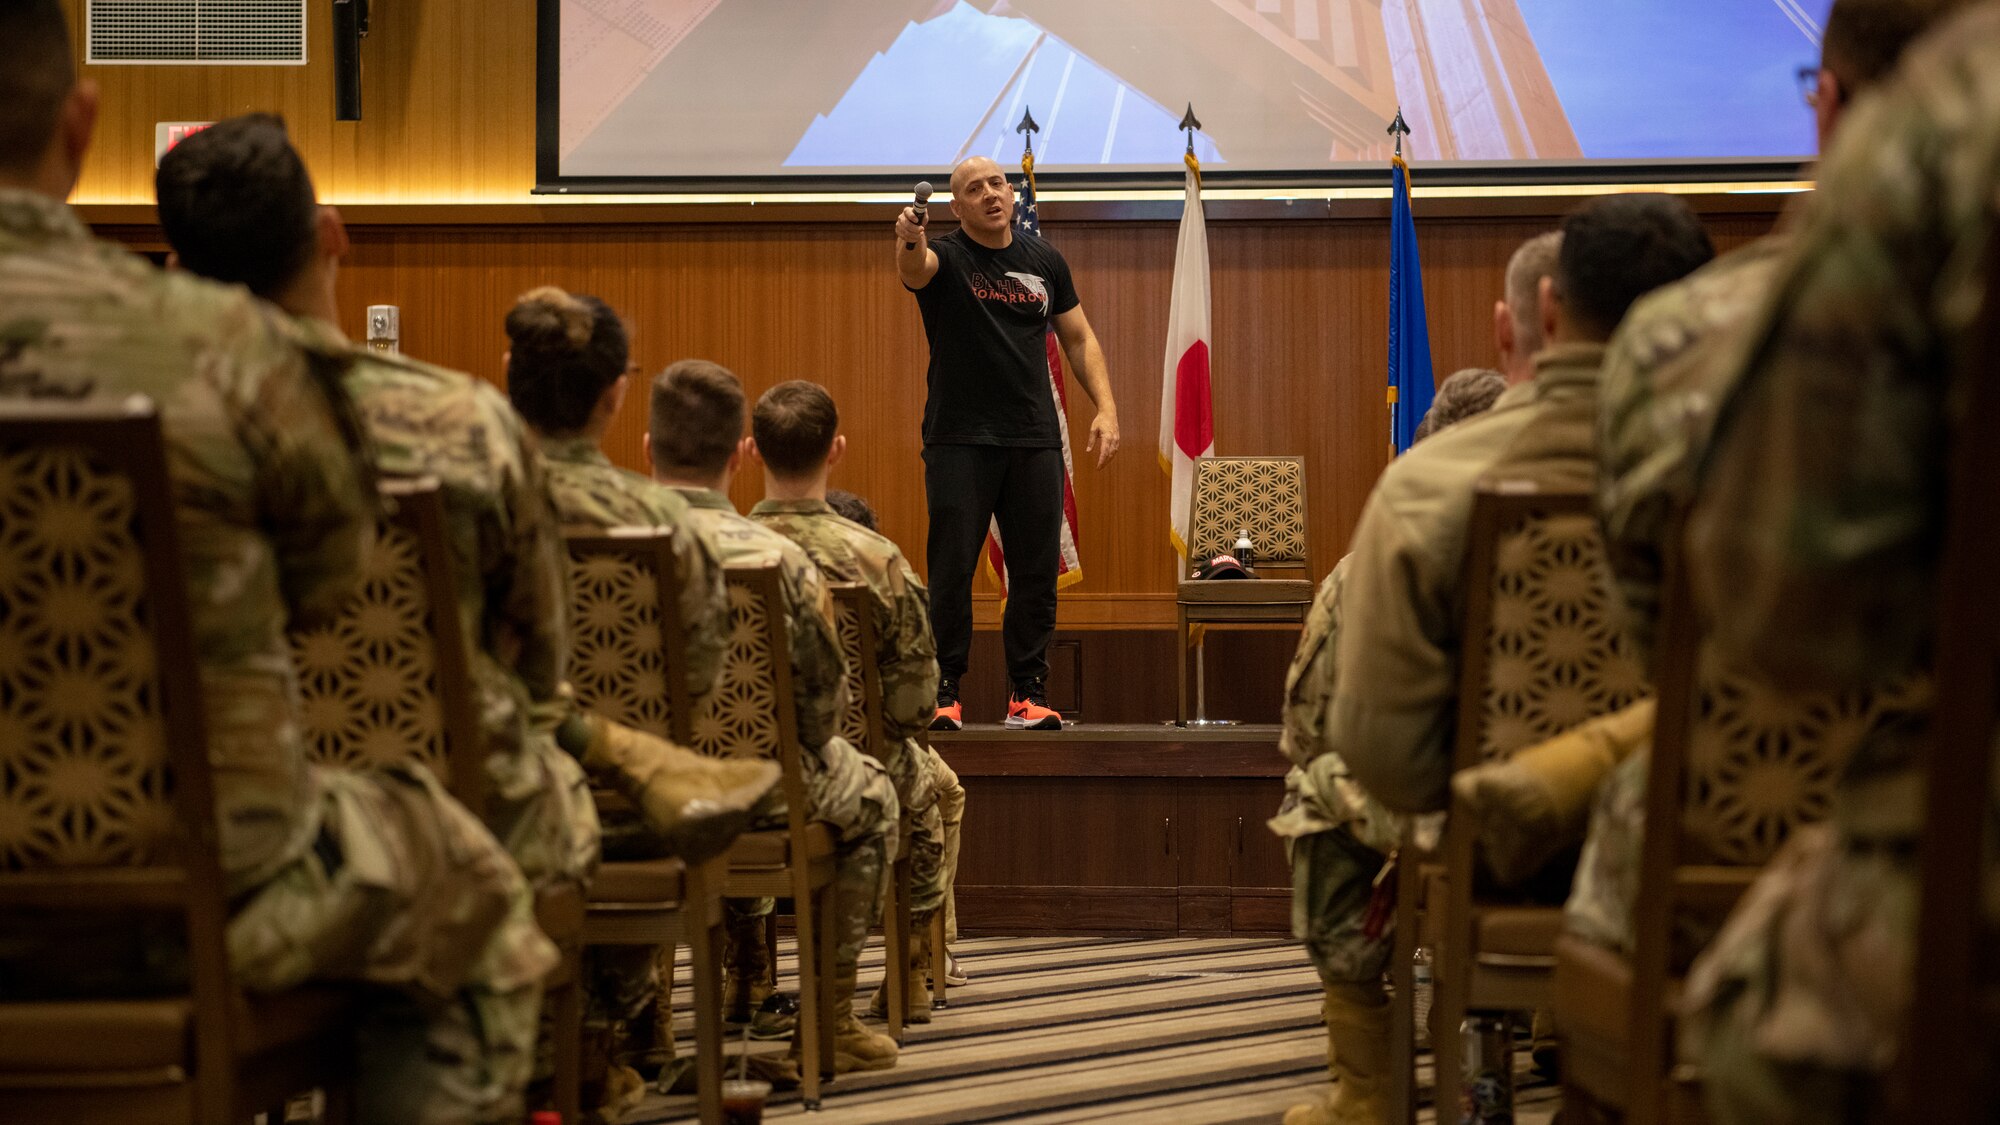 Kevin Hines, a motivational speaker and suicide attempt survivor, talks with Airmen regarding mental stress and suicidal thoughts at Kadena Air Base, Japan, April 19, 2023. Hines visited Kadena to speak with Airmen and shared his experience in surviving a suicide attempt. (U.S. Air Force photo by Airman 1st Class Edward Yankus)